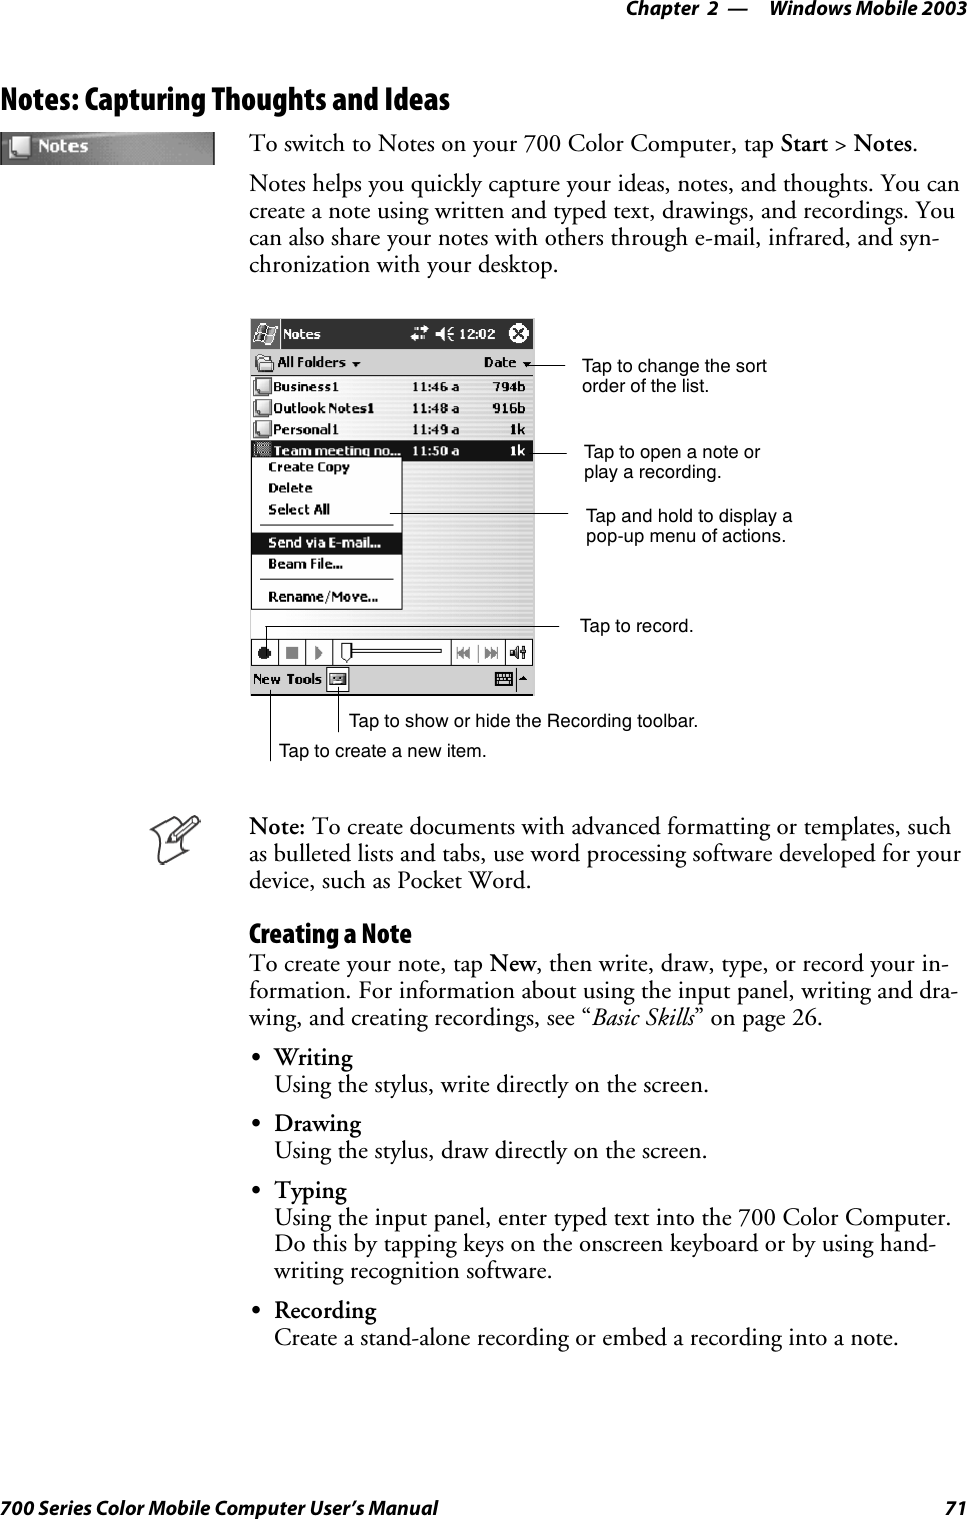 Windows Mobile 2003—Chapter 271700 Series Color Mobile Computer User’s ManualNotes: Capturing Thoughts and IdeasTo switch to Notes on your 700 Color Computer, tap Start &gt;Notes.Notes helps you quickly capture your ideas, notes, and thoughts. You cancreate a note using written and typed text, drawings, and recordings. Youcan also share your notes with others through e-mail, infrared, and syn-chronization with your desktop.Tap to change the sortorder of the list.Tap to create a new item.Taptoopenanoteorplay a recording.Tap and hold to display apop-up menu of actions.Tap to record.Tap to show or hide the Recording toolbar.Note: To create documents with advanced formatting or templates, suchasbulletedlistsandtabs,usewordprocessingsoftwaredevelopedforyourdevice, such as Pocket Word.Creating a NoteTo create your note, tap New,thenwrite,draw,type,orrecordyourin-formation. For information about using the input panel, writing and dra-wing, and creating recordings, see “Basic Skills” on page 26.SWritingUsing the stylus, write directly on the screen.SDrawingUsing the stylus, draw directly on the screen.STypingUsing the input panel, enter typed text into the 700 Color Computer.Do this by tapping keys on the onscreen keyboard or by using hand-writing recognition software.SRecordingCreate a stand-alone recording or embed a recording into a note.